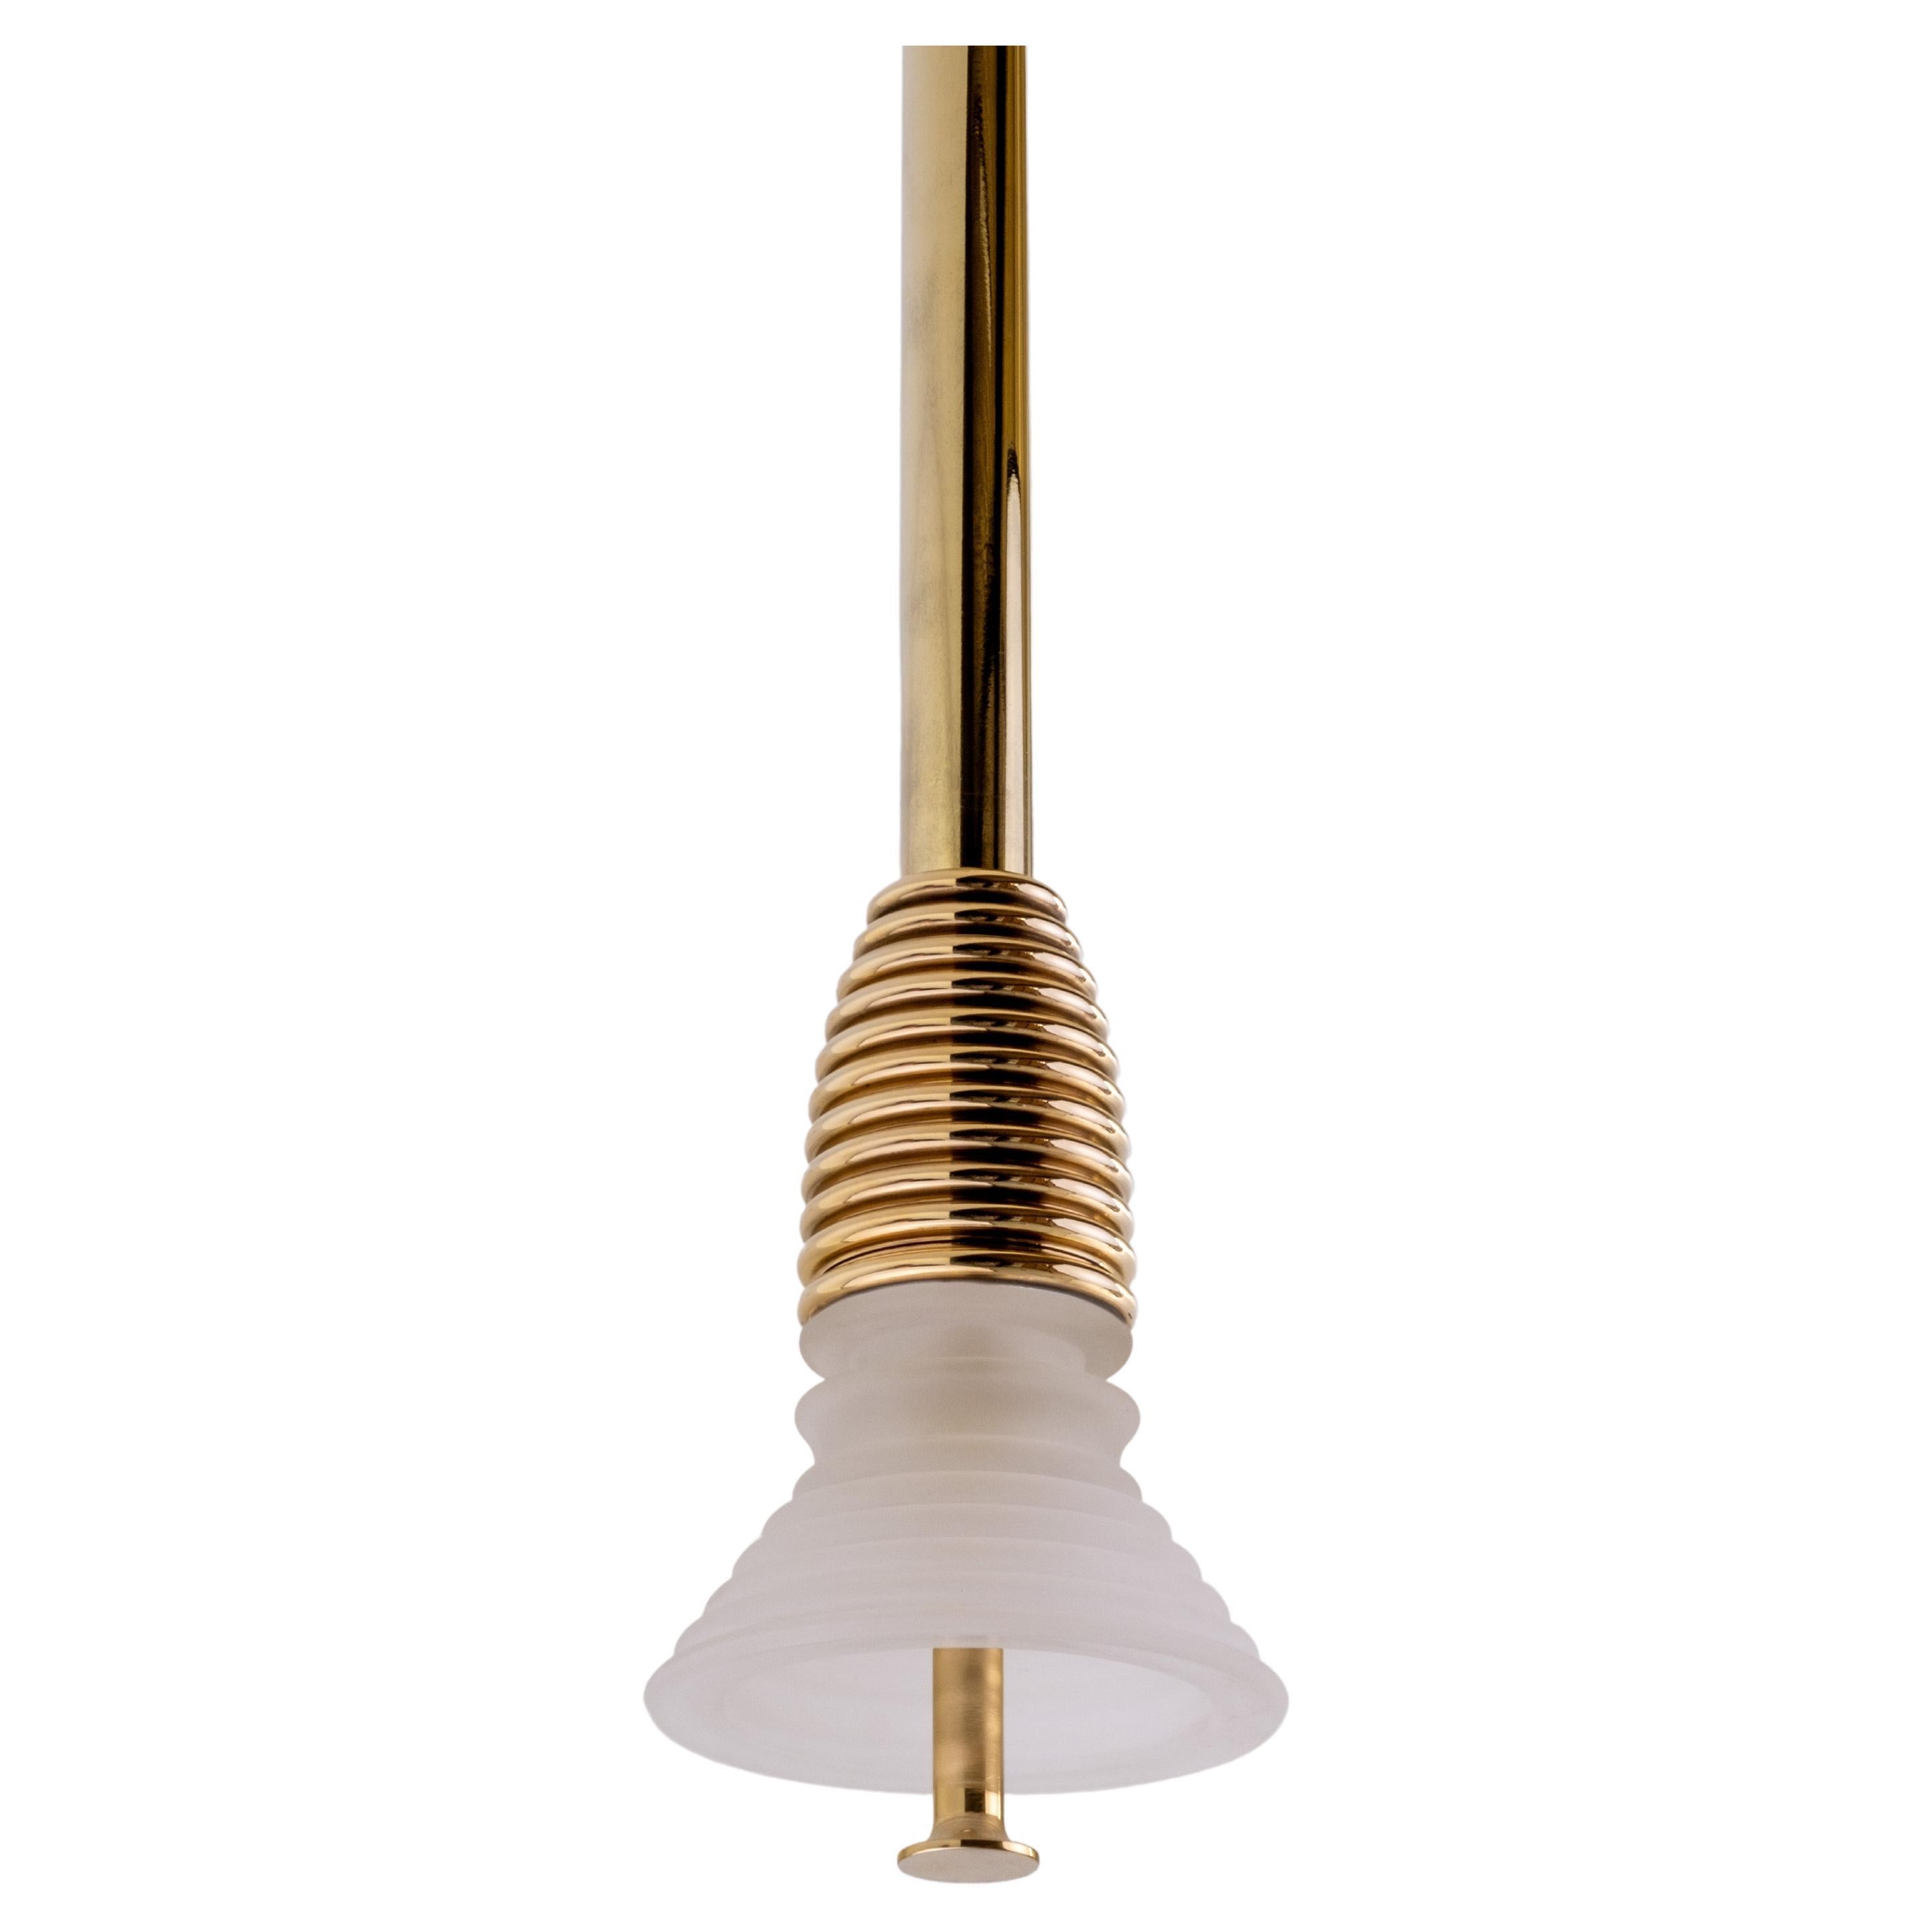 The Insulator 'A' Pendant in polished brass and frosted glass by NOVOCASTRIAN